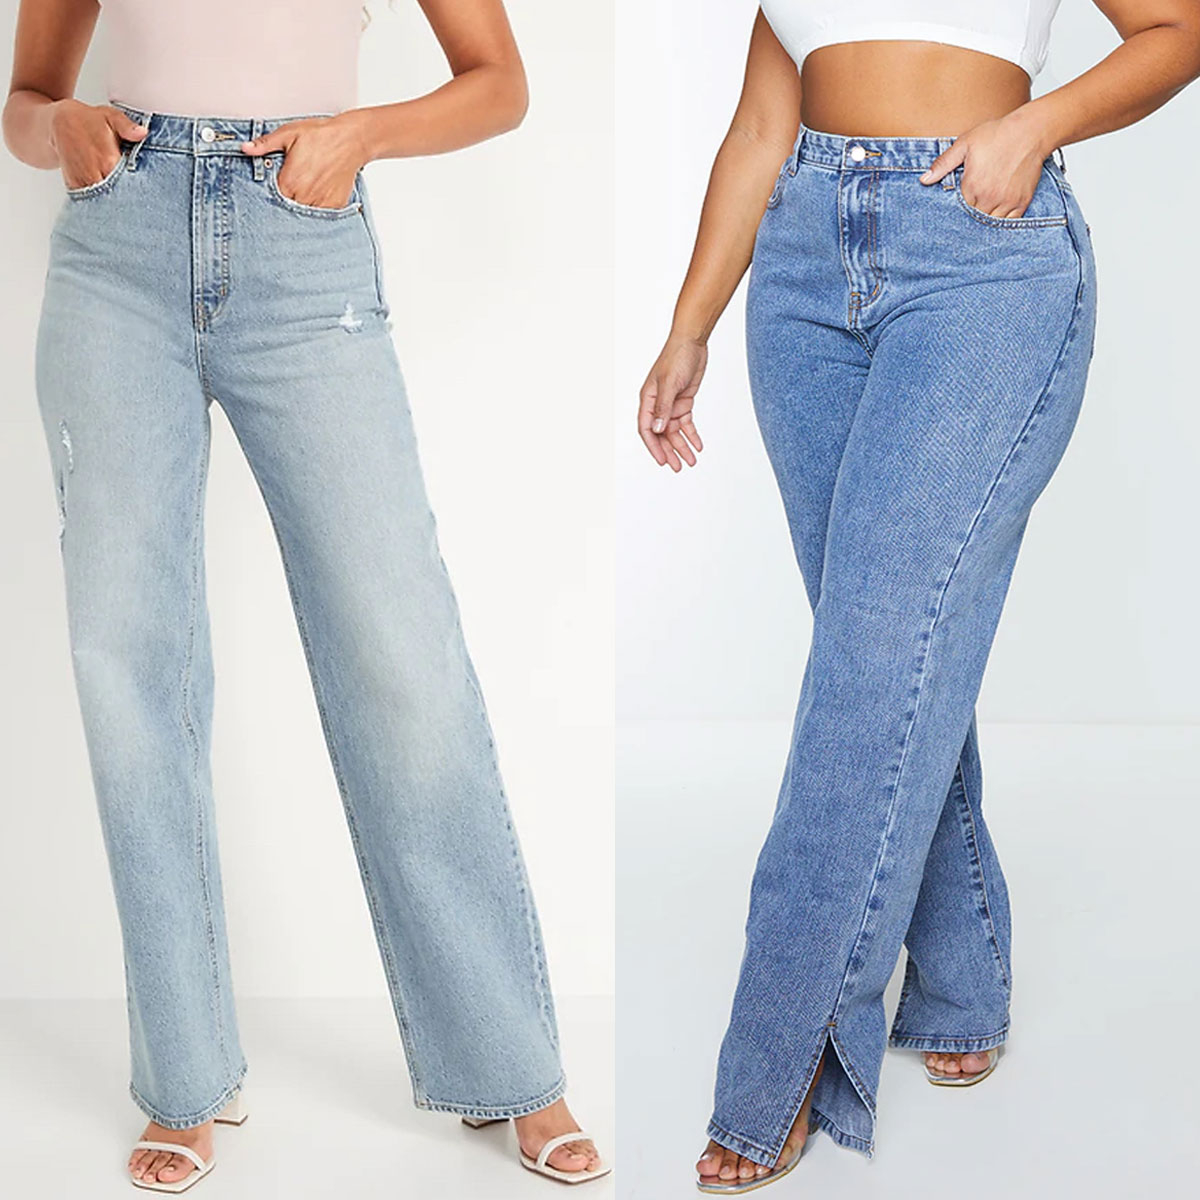 Shop the Best Under $60 Denim Jeans From Levi's, Abercrombie & More